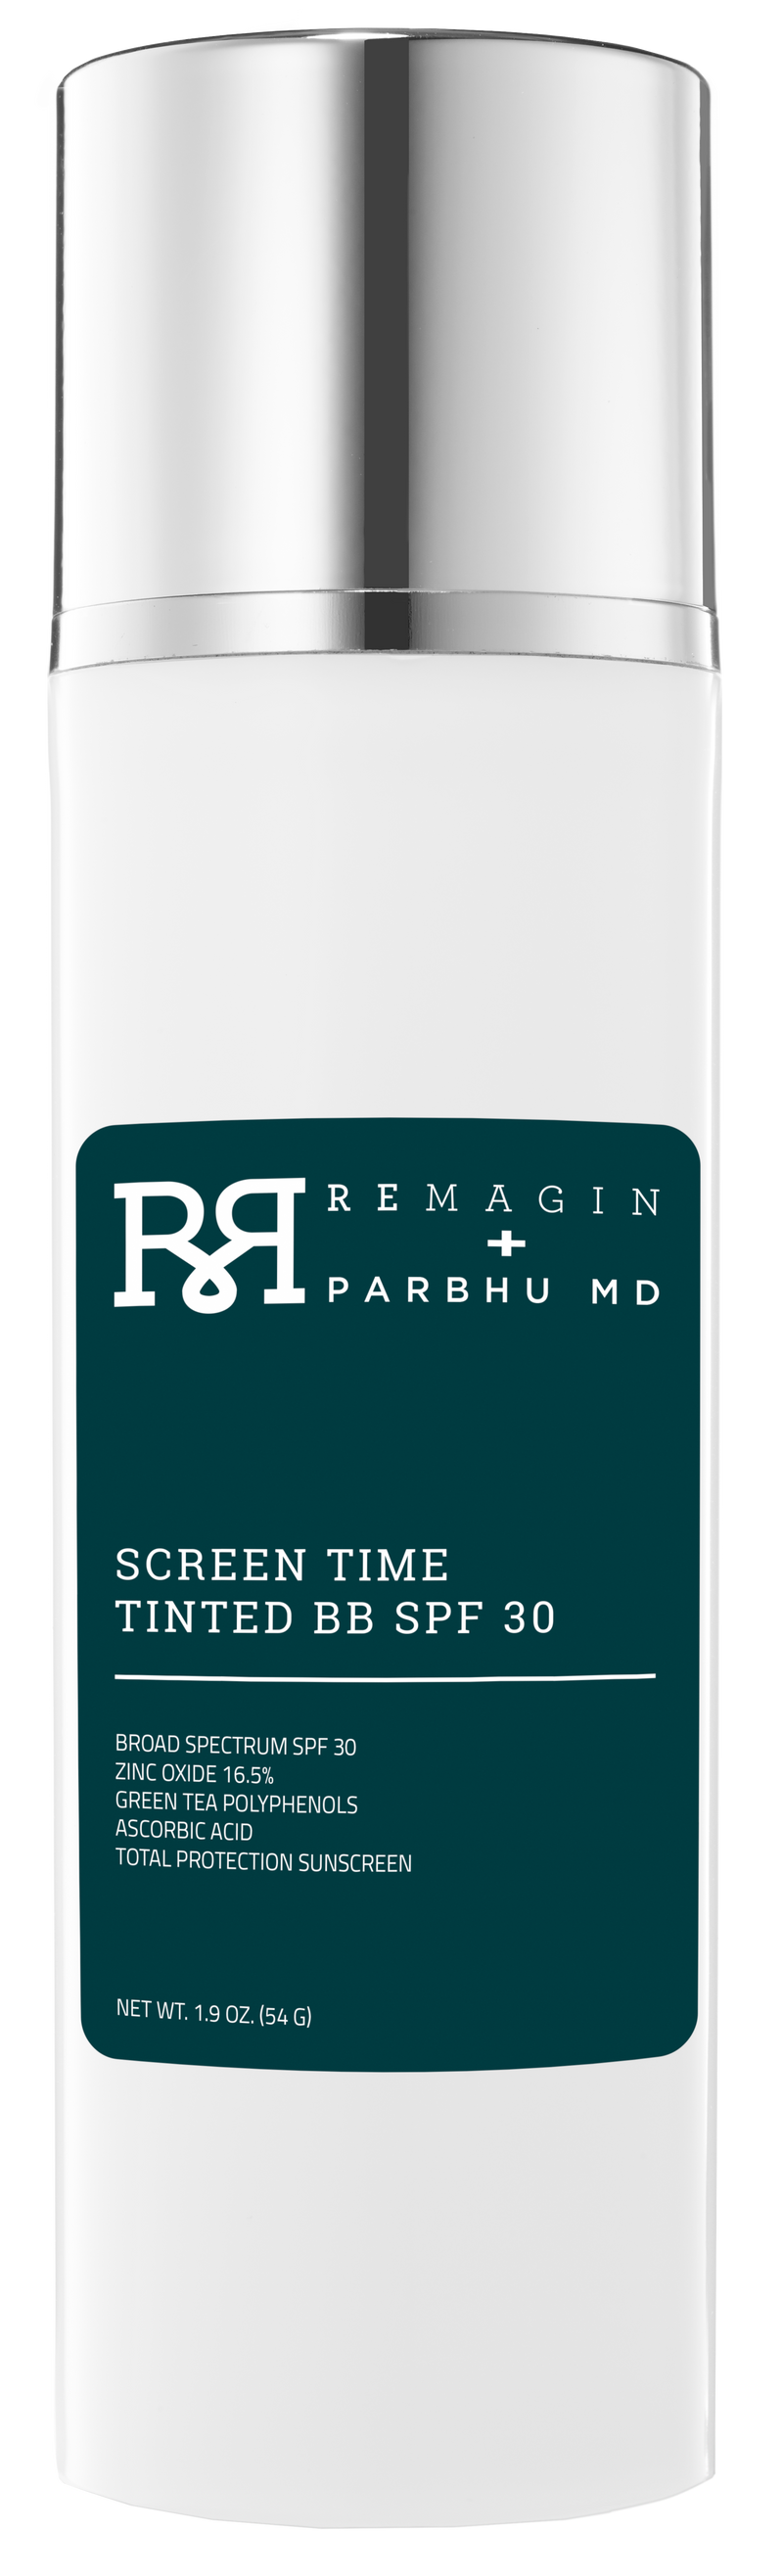 SCREEN TIME TINTED BB SPF 30